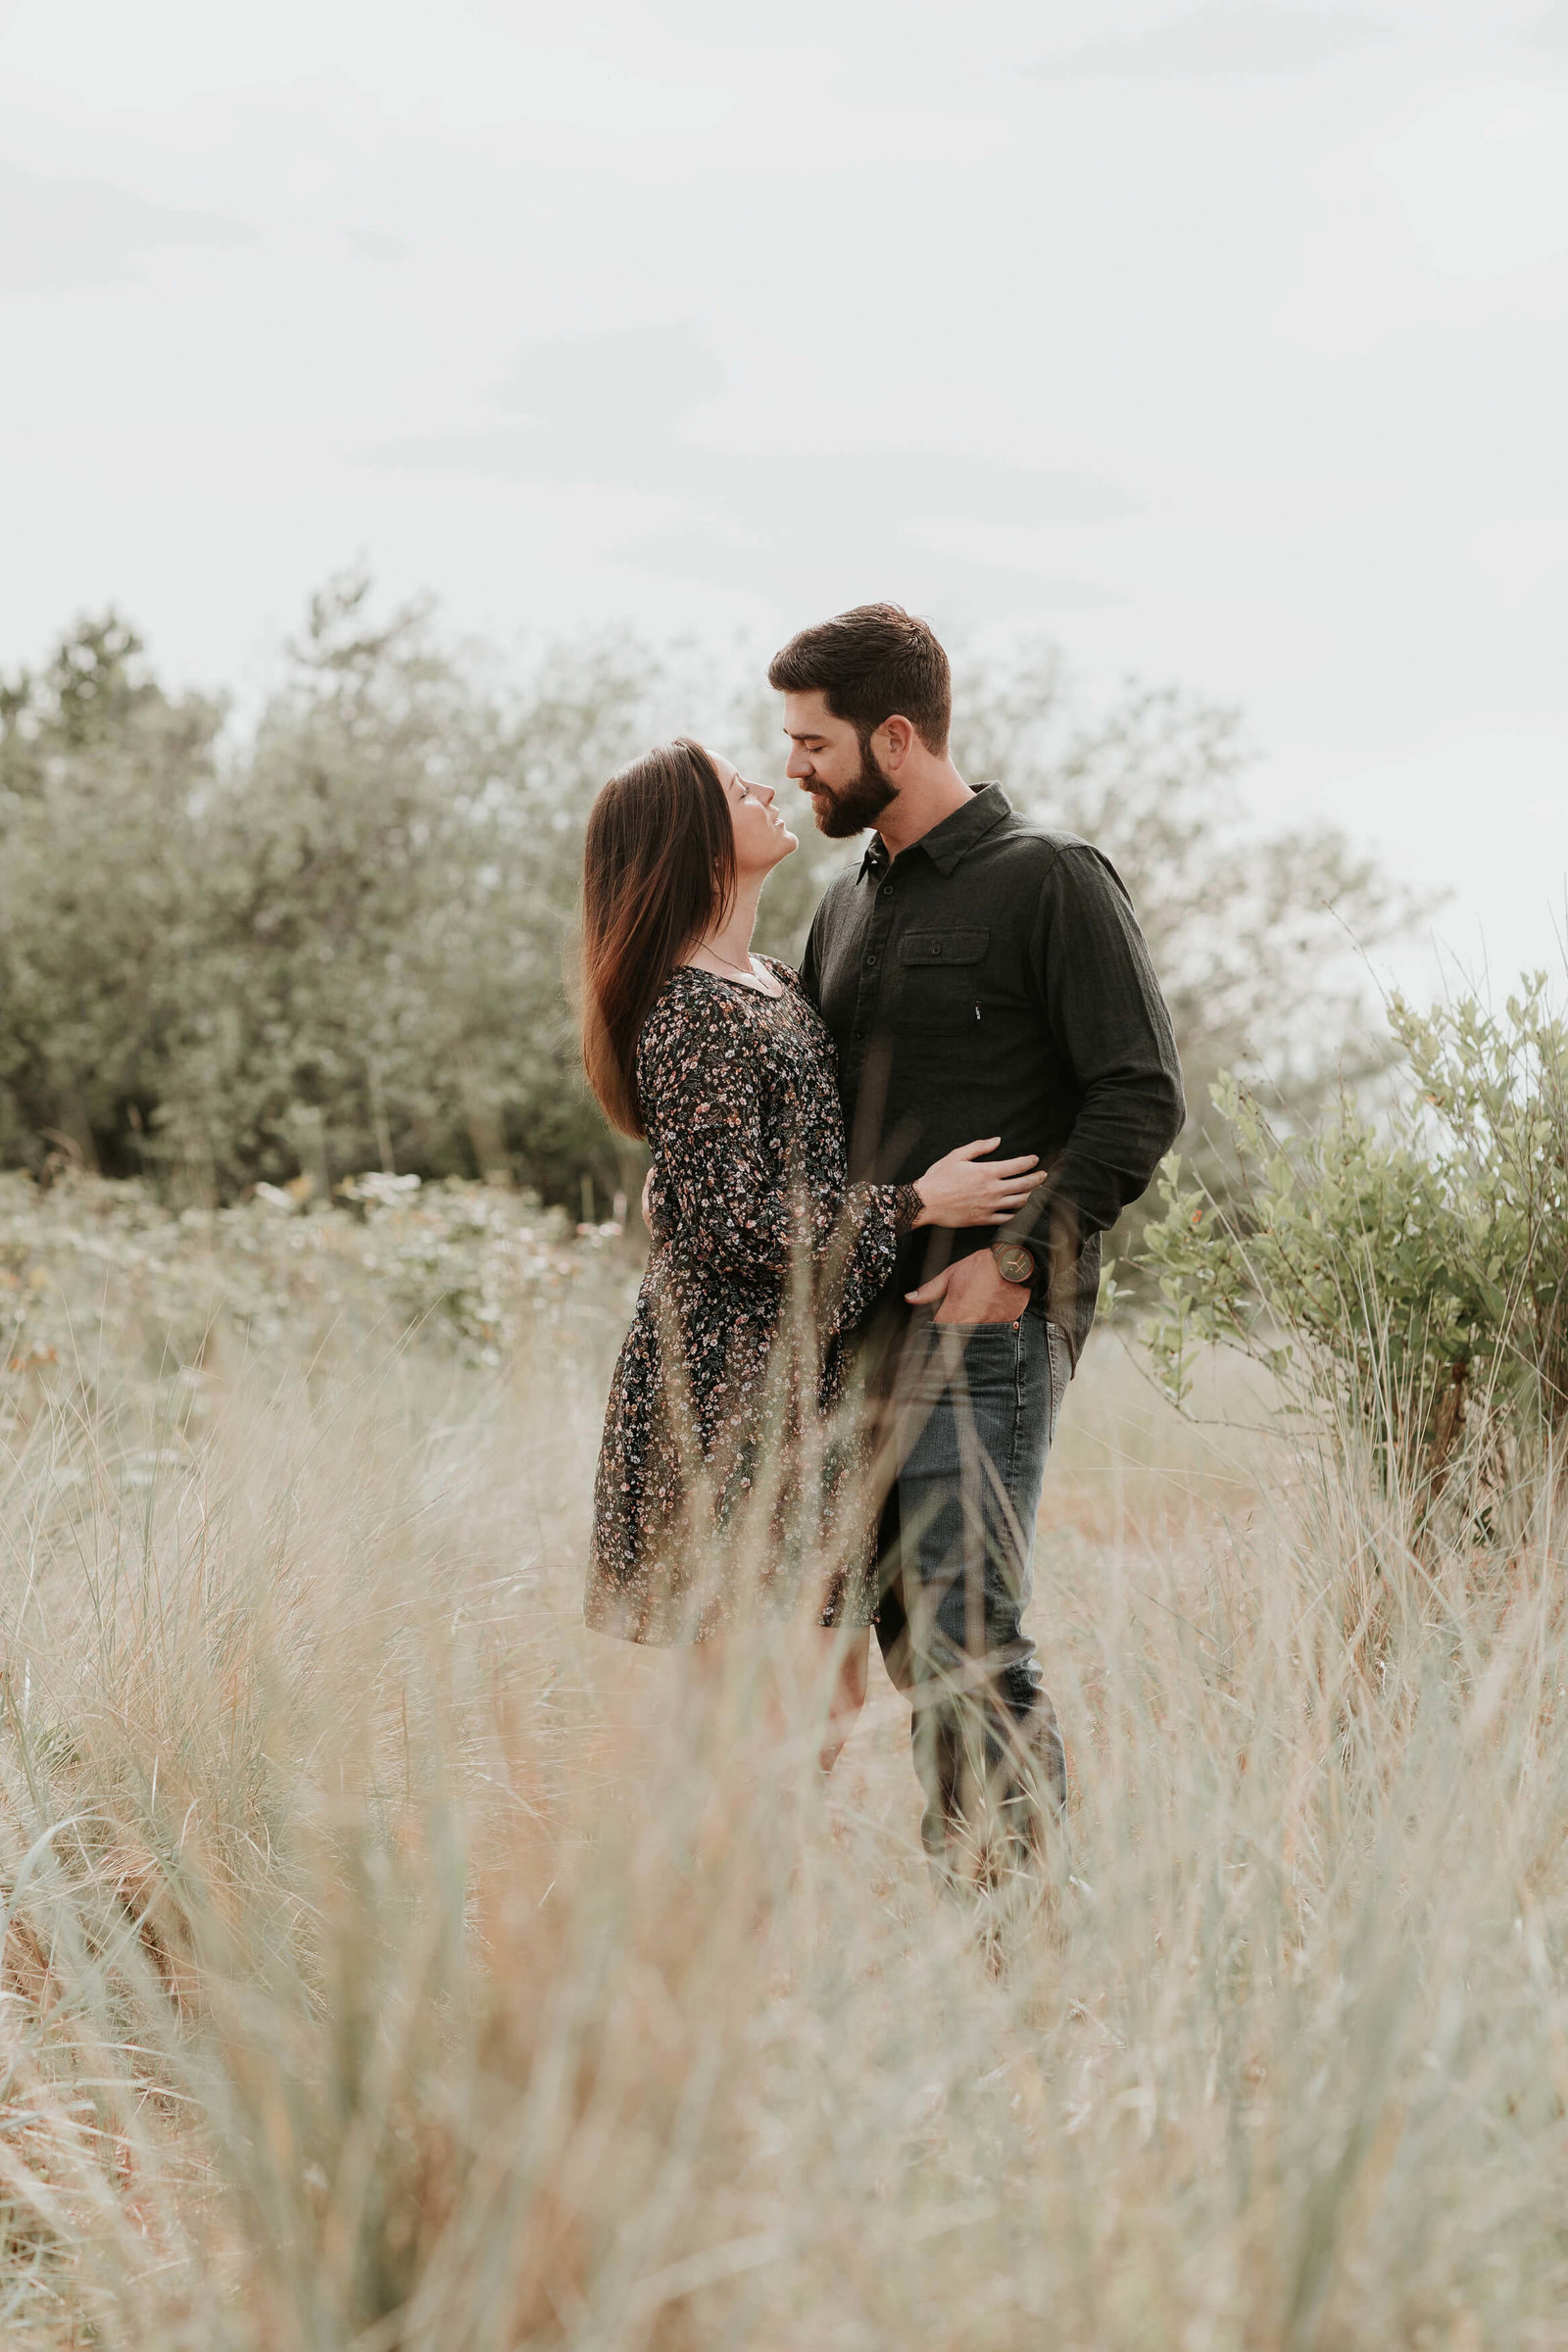 Discovery-Park-Engagement-Chelsey+Troy-by-Adina-Preston-Photography-2019-16